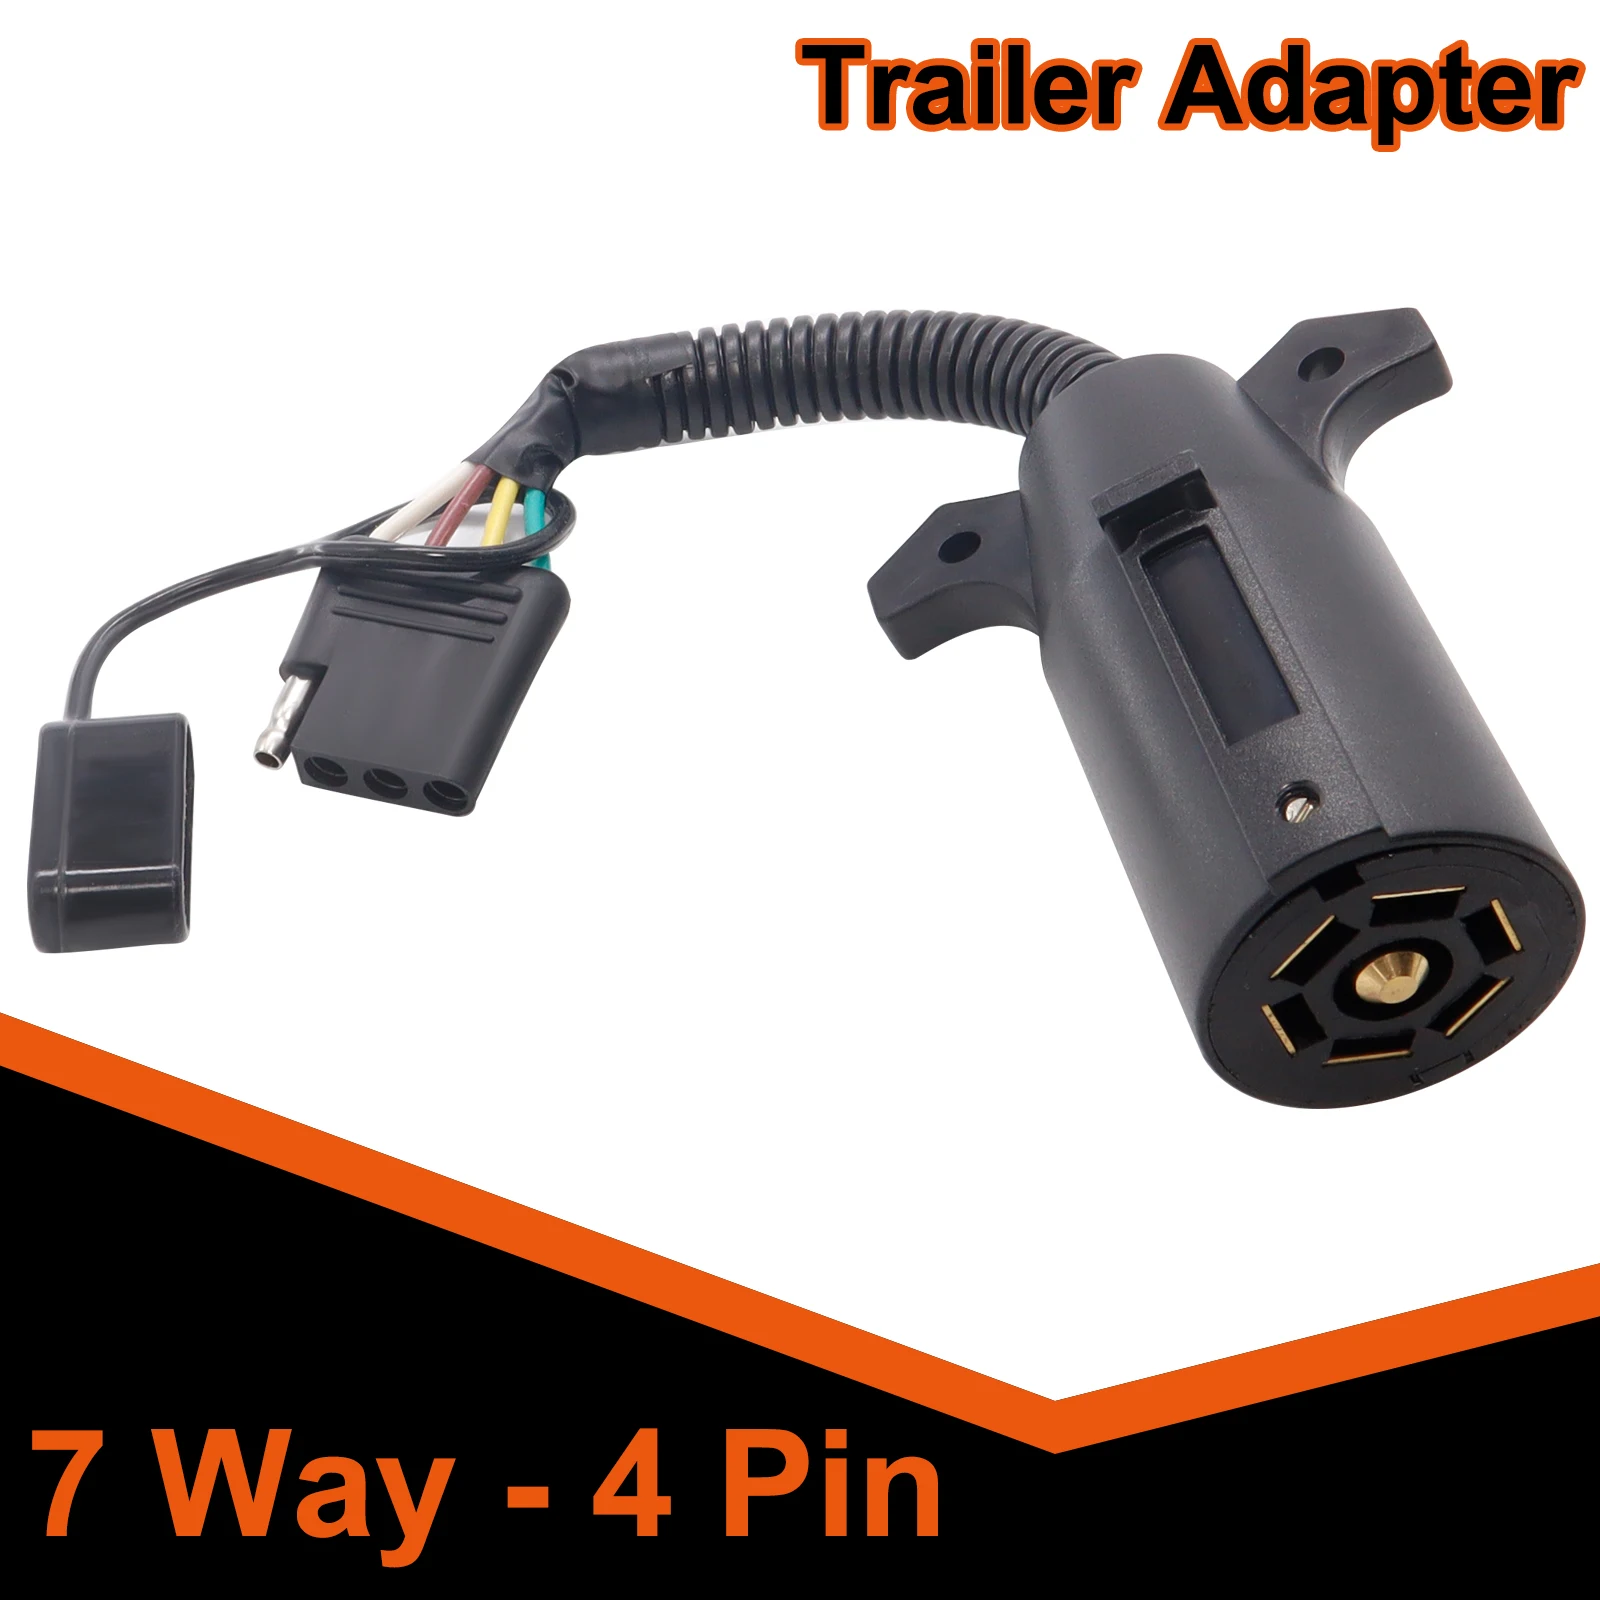 

7 Way Round Blade to 4 Pin Flat Trailer Adapter Wiring Light Plug Caravan RV Tow Truck Boat Adapters Connector Dust-proof Cover